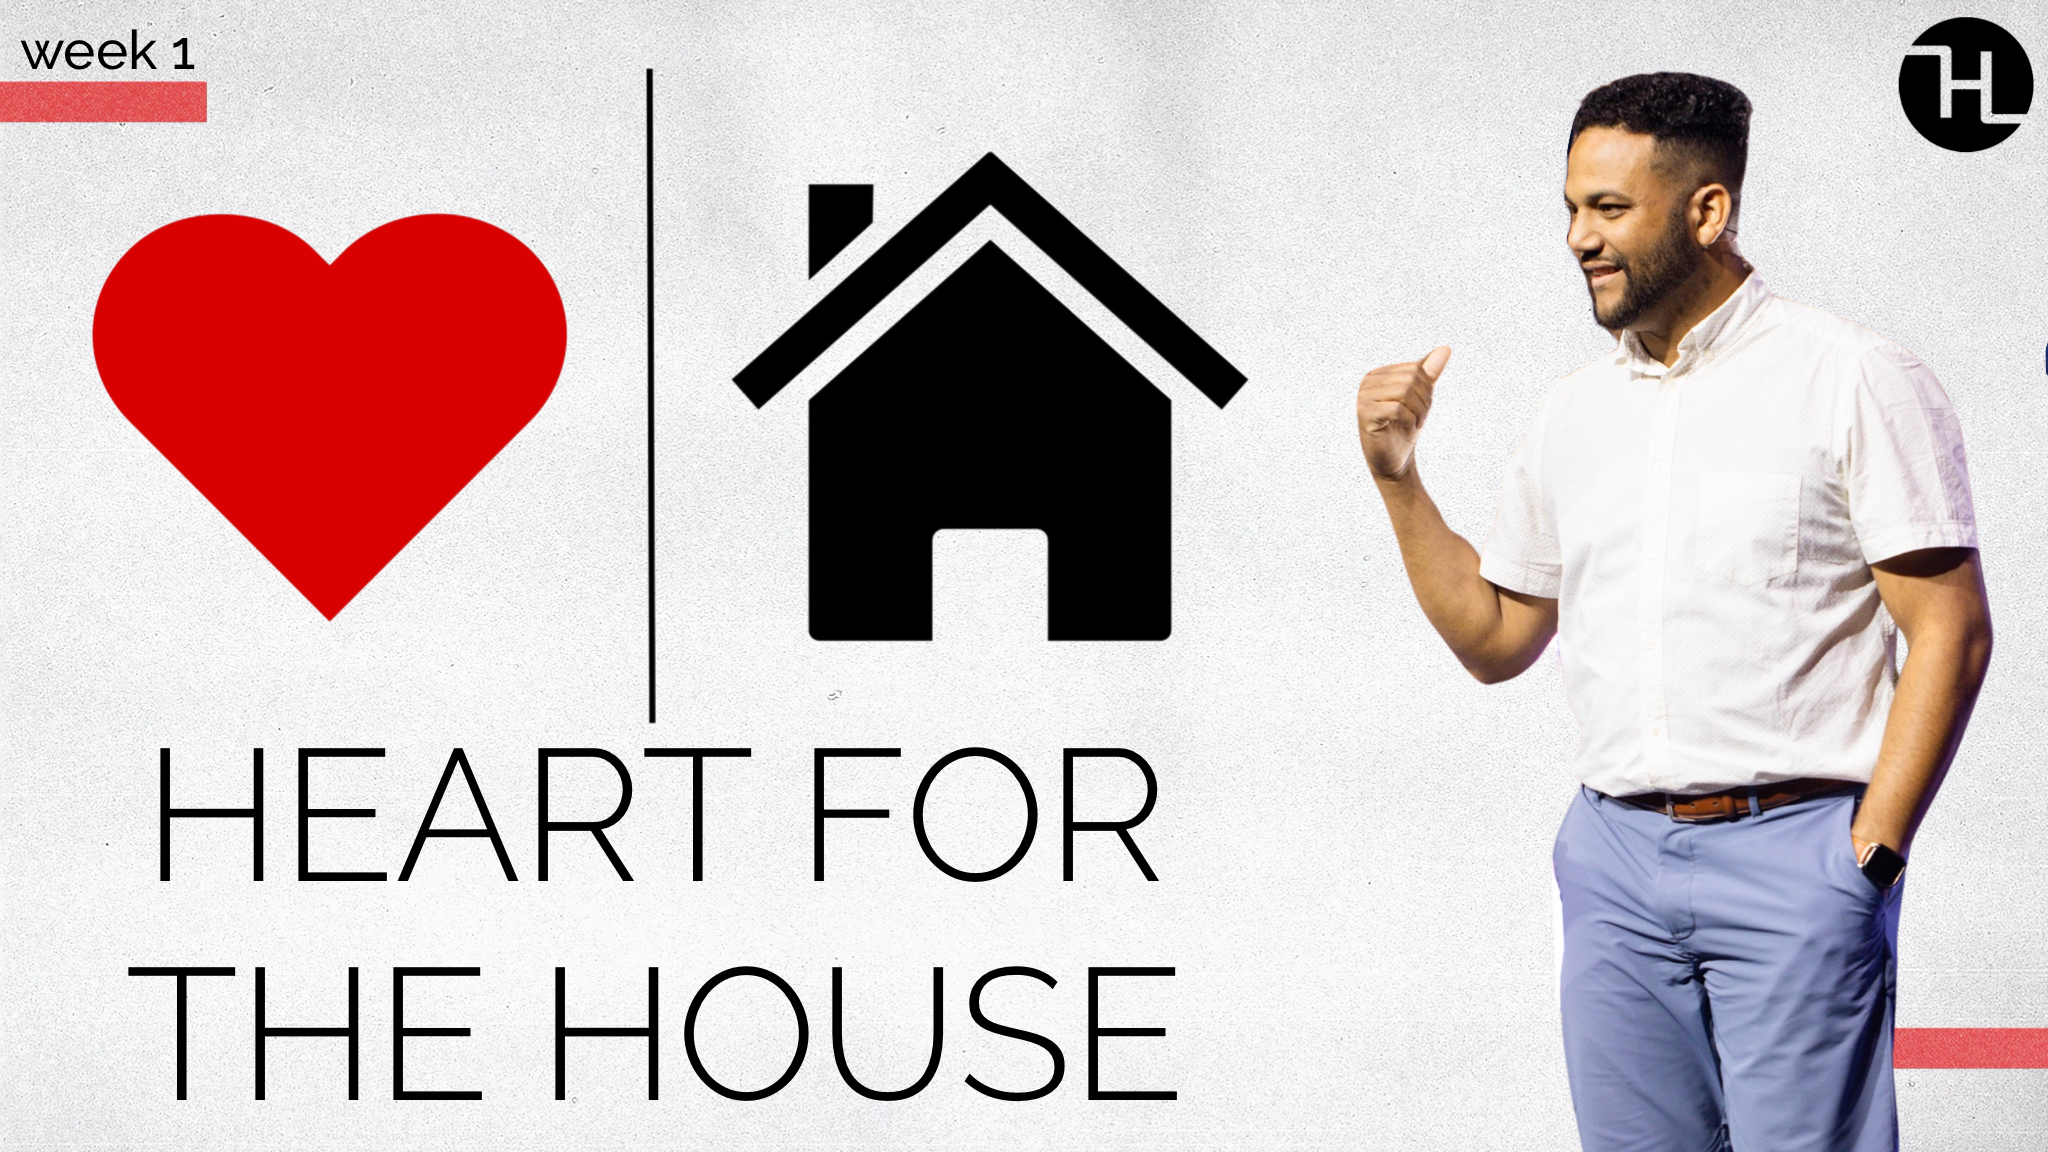 Heart for the House Week 1